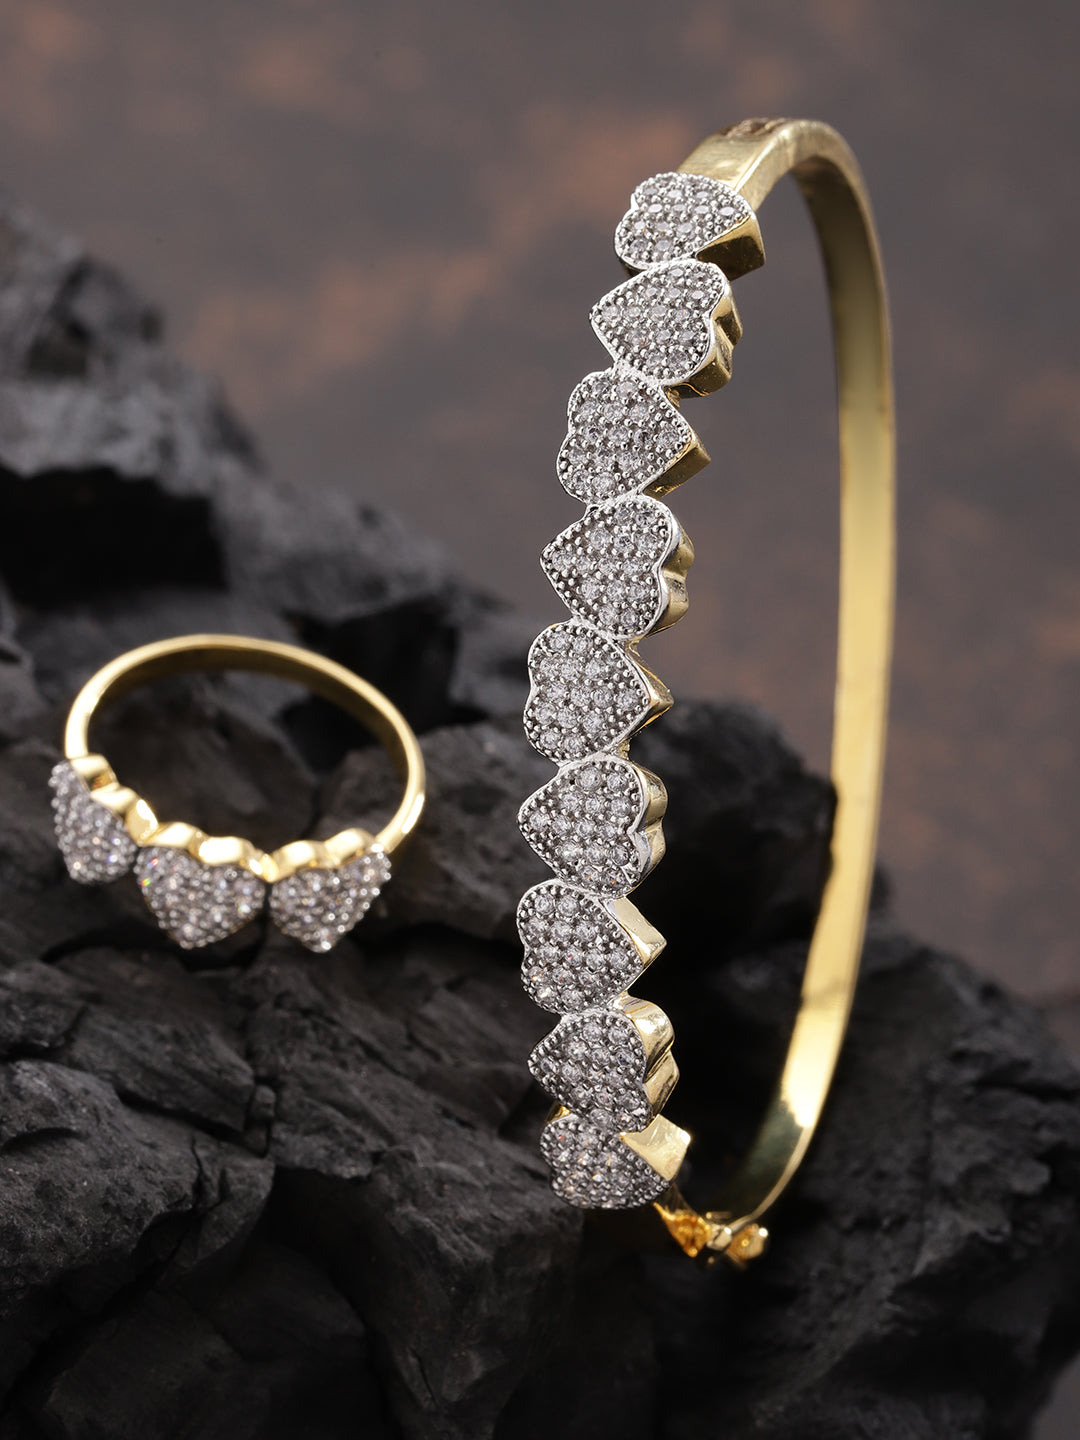 Priyaasi Gold-Plated American Diamond Studded Bracelet With Finger Ring in Heart Pattern